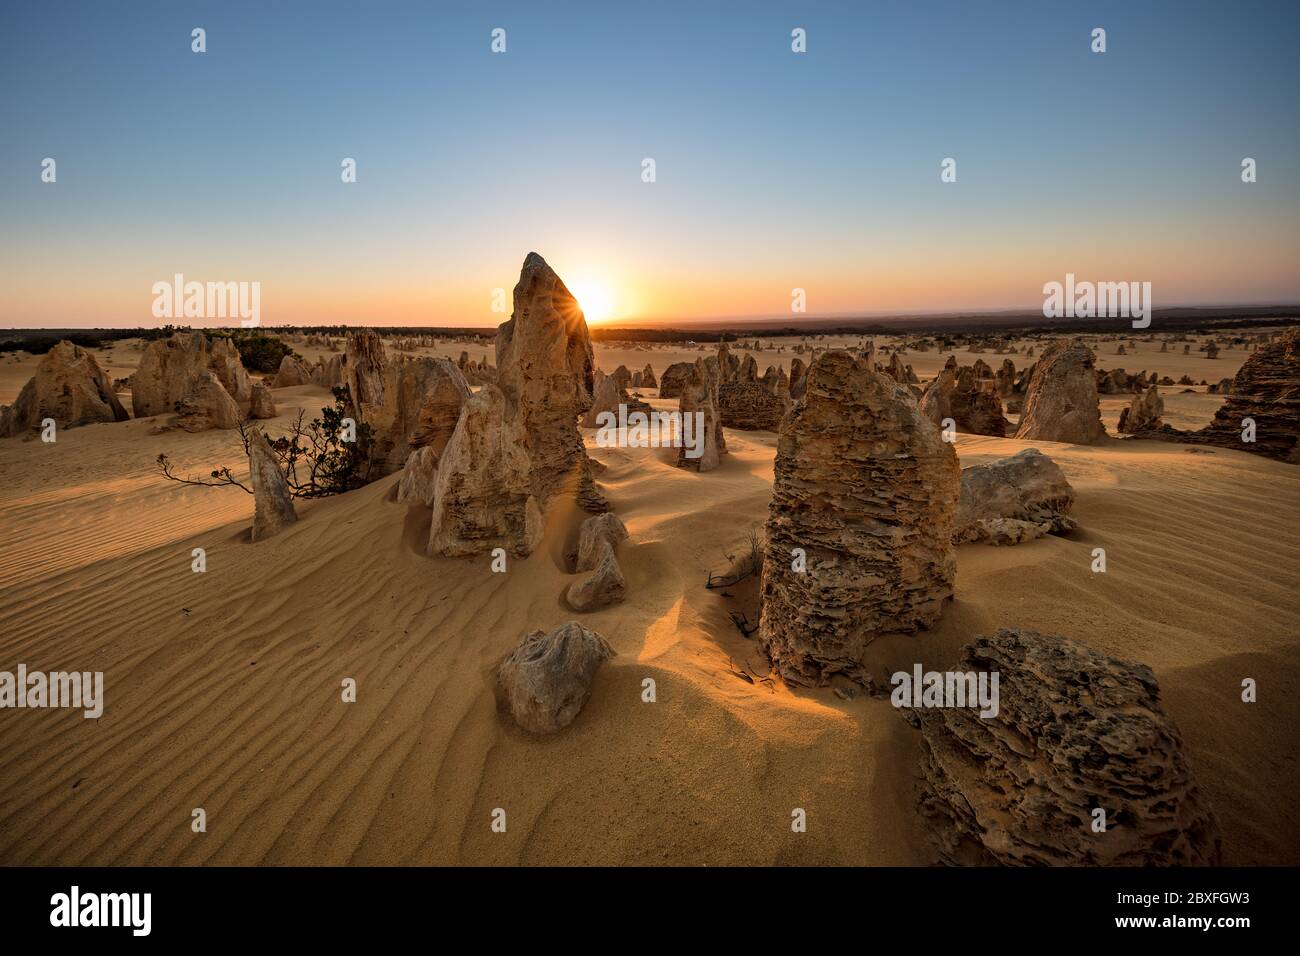 Sun setting behind the limestone stacks in the Pinnacles desert in the Nambung national park located north of Perth in Western Australia Stock Photo